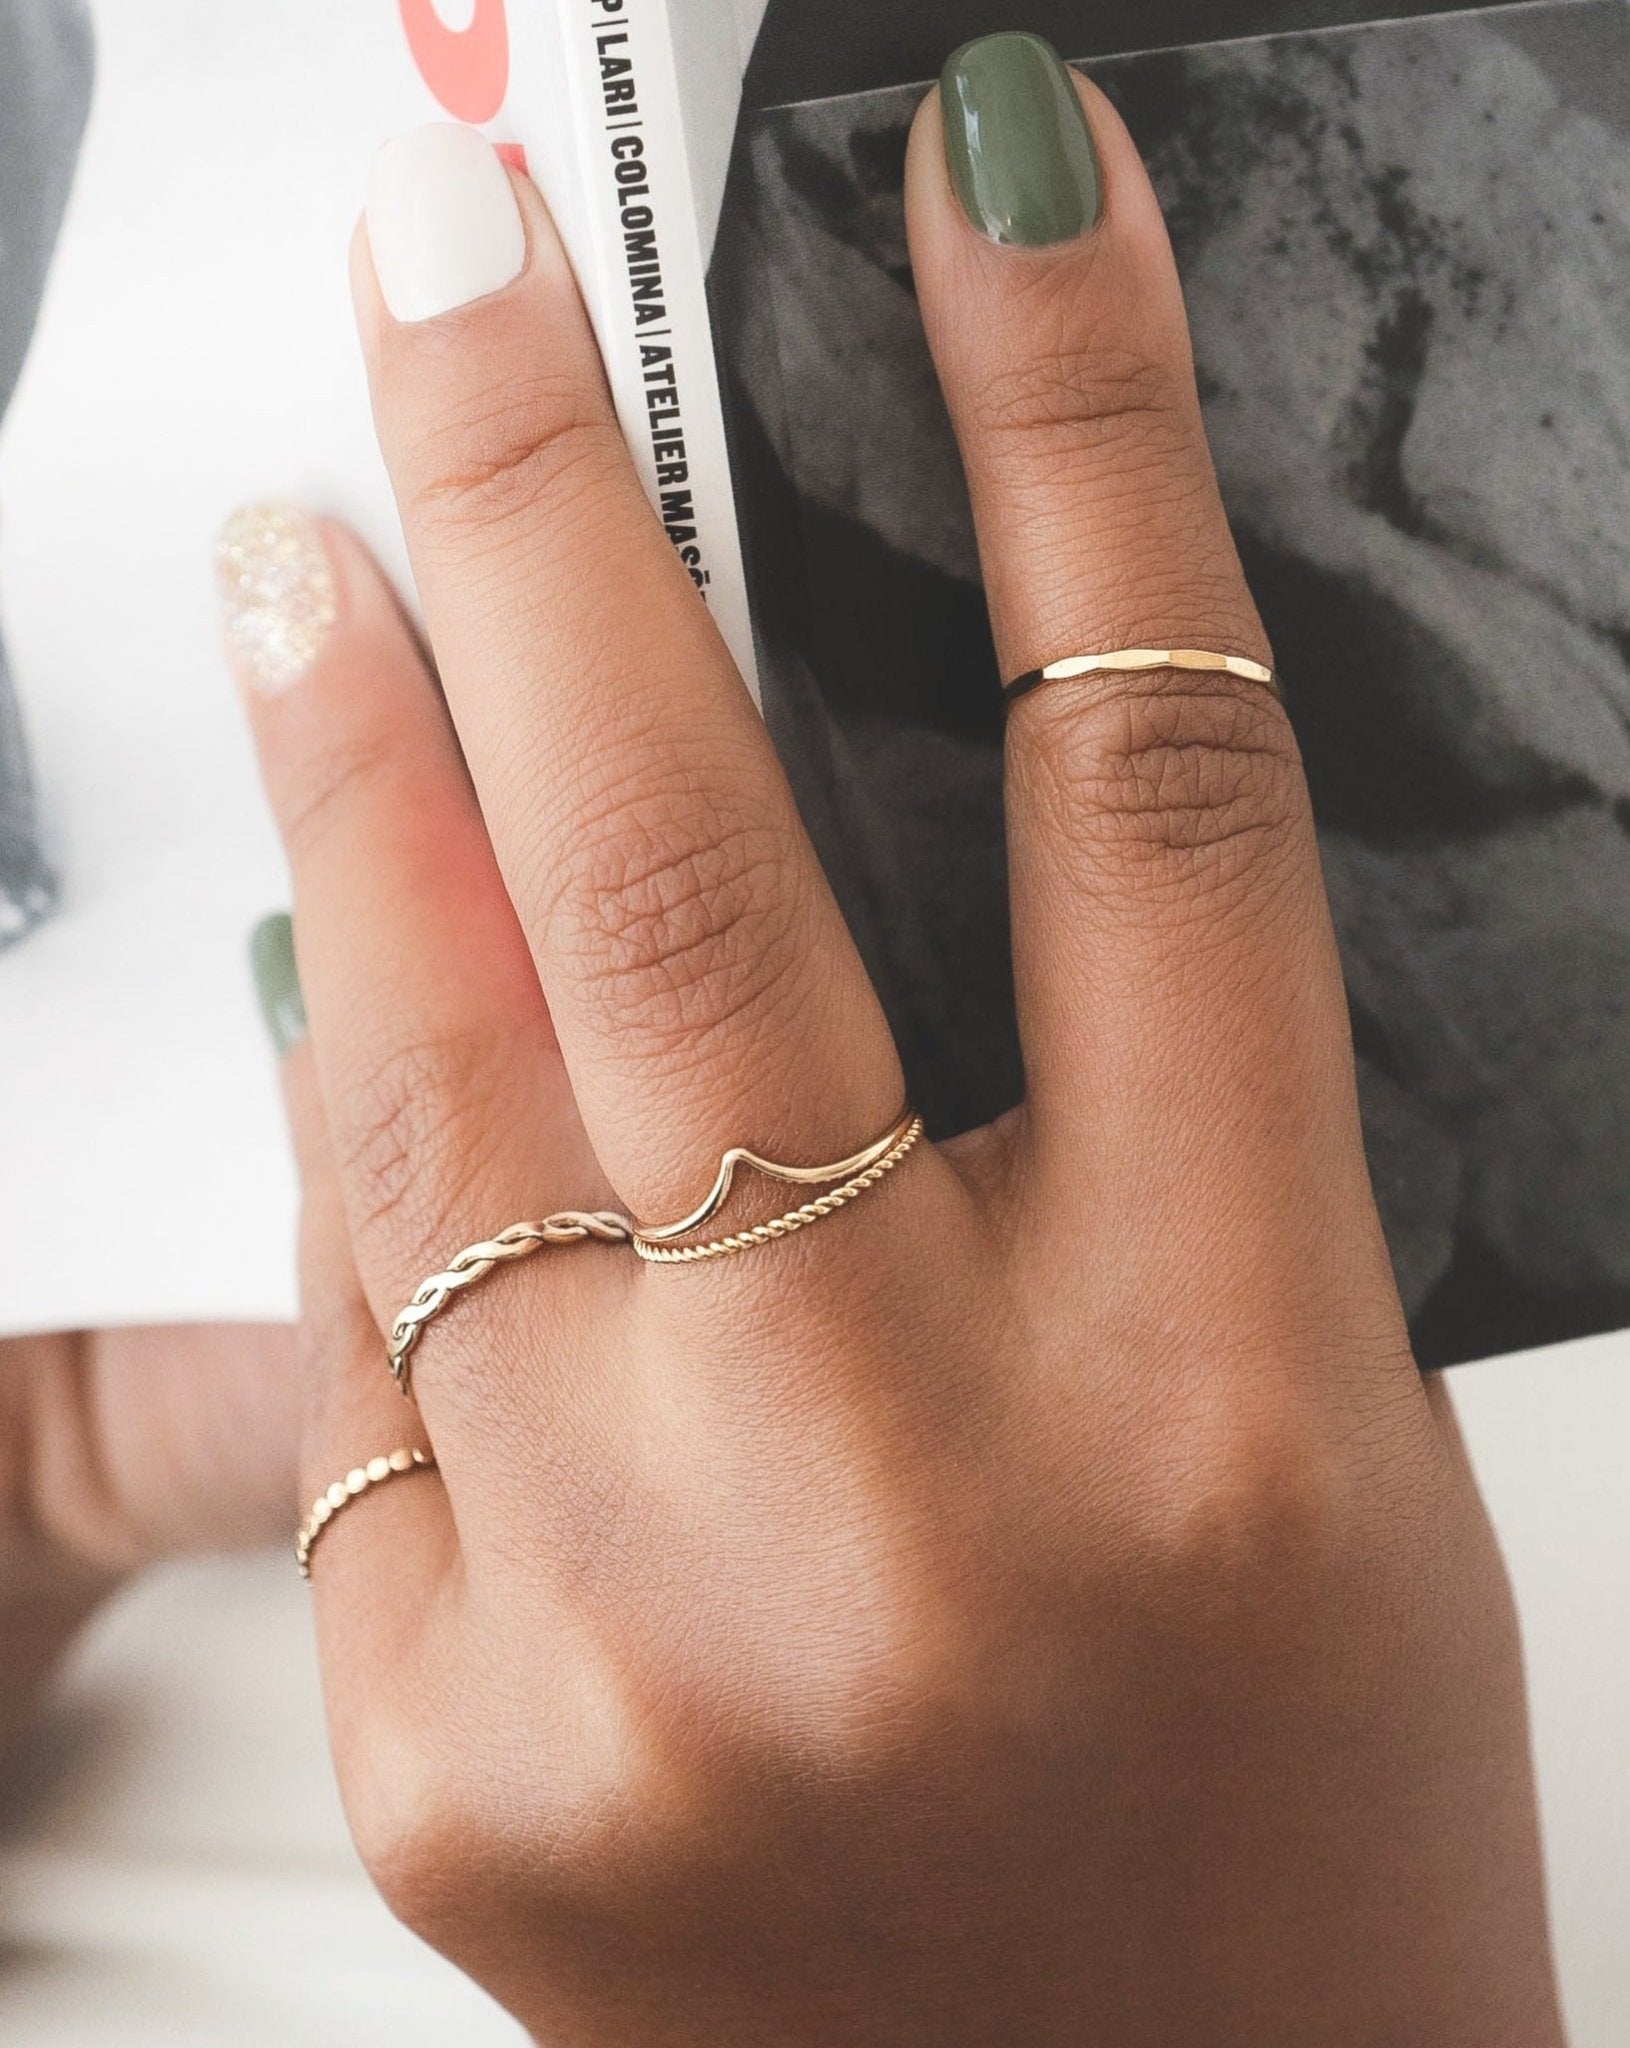 BRAIDED RING - DE.FINE Collection Jewelry